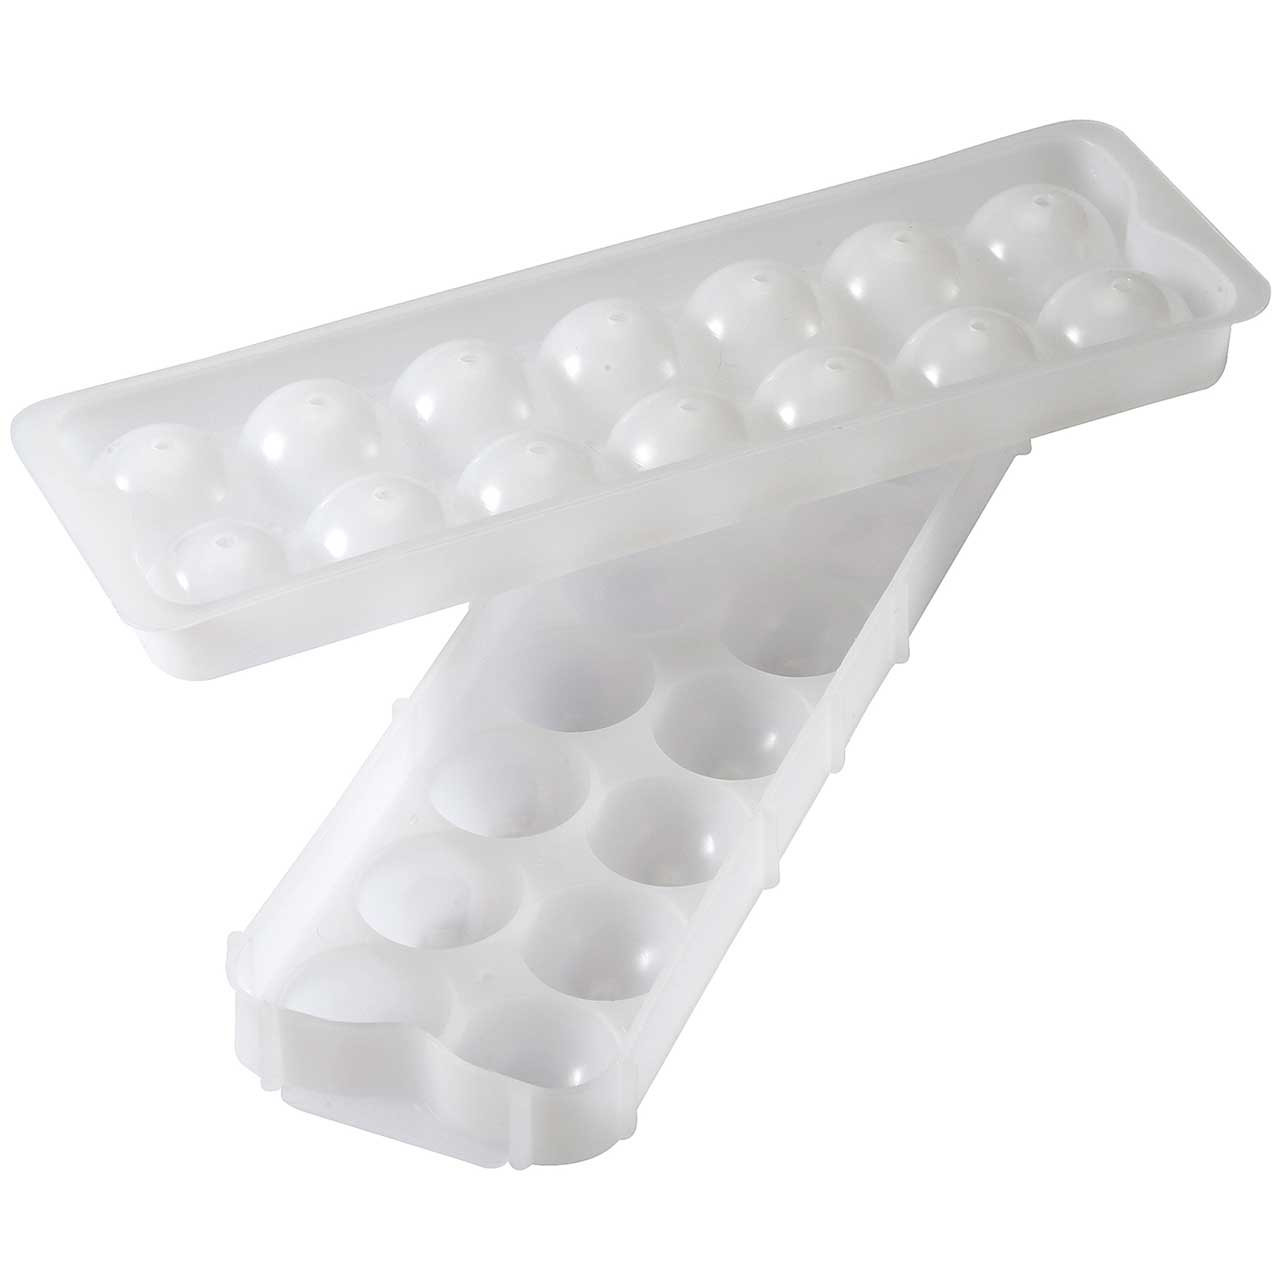 Portable Ice Ball Tray – Things2Me